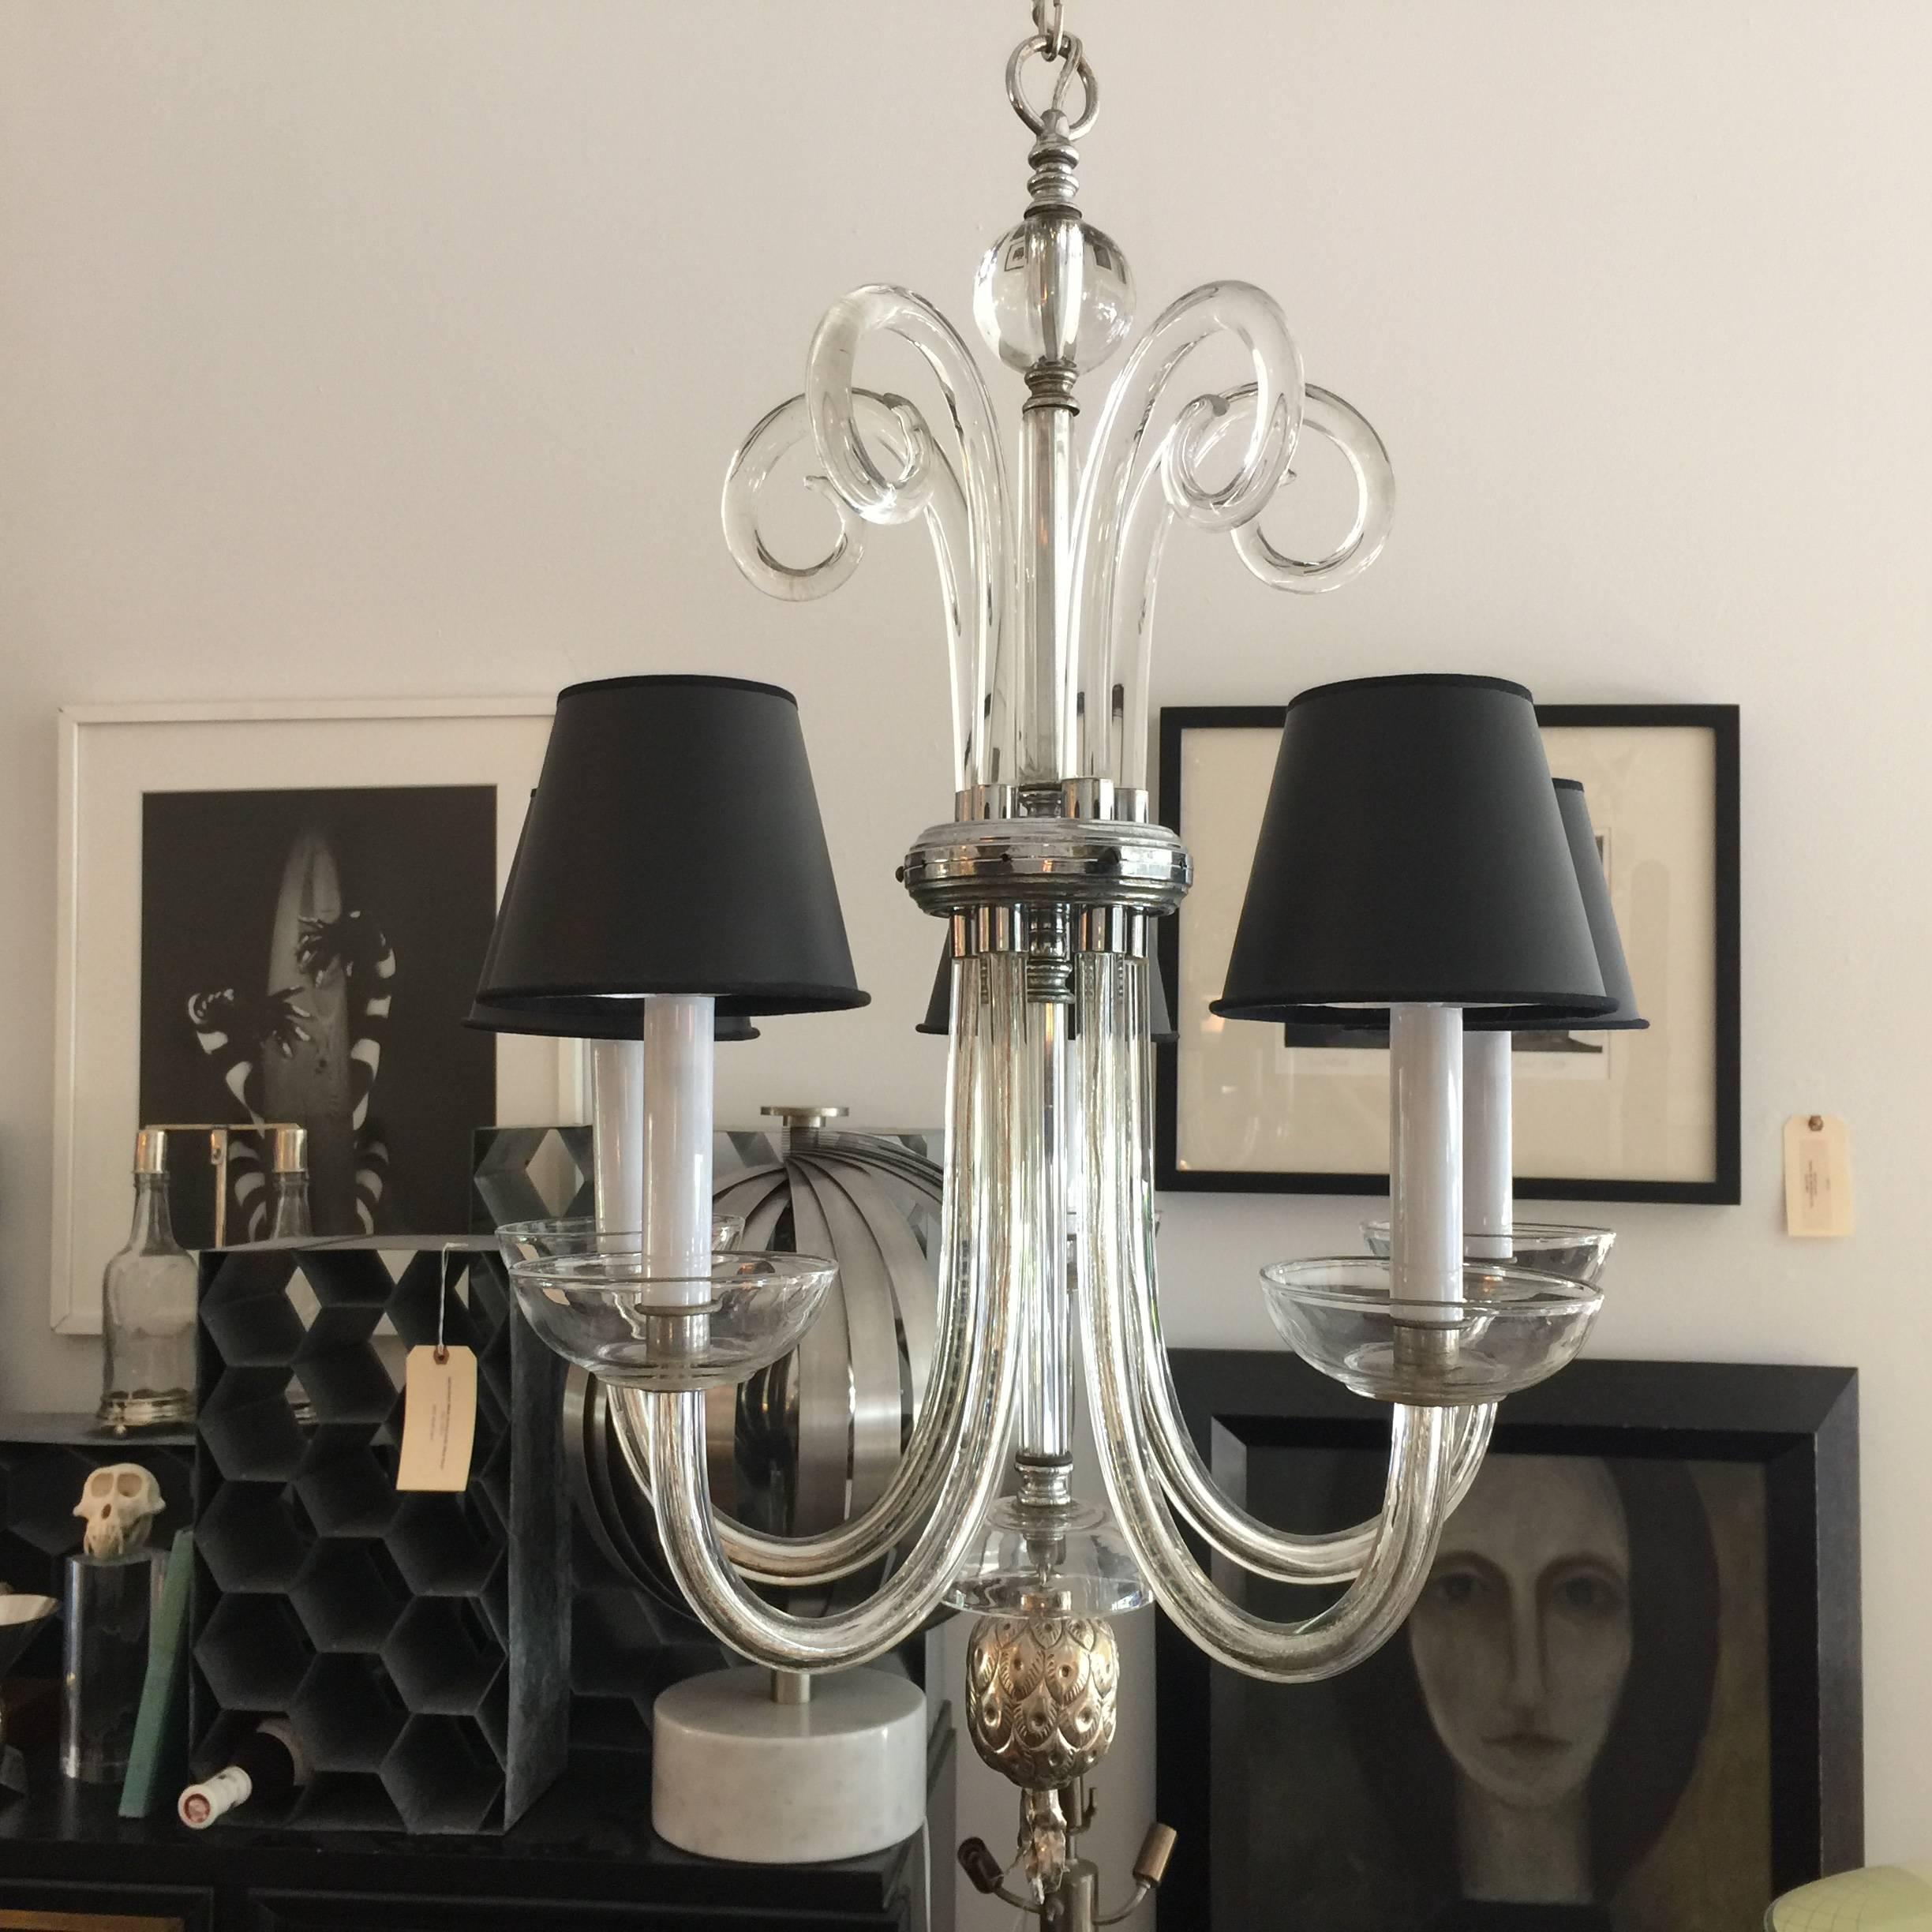 Hand blown crystal chandelier with lovely details; pineapple in sterling silver finial and central ring.  Five arms and curled finials.  It is like a piece of jewelry!

NOTE:  shades shown here are NOT INCLUDED.